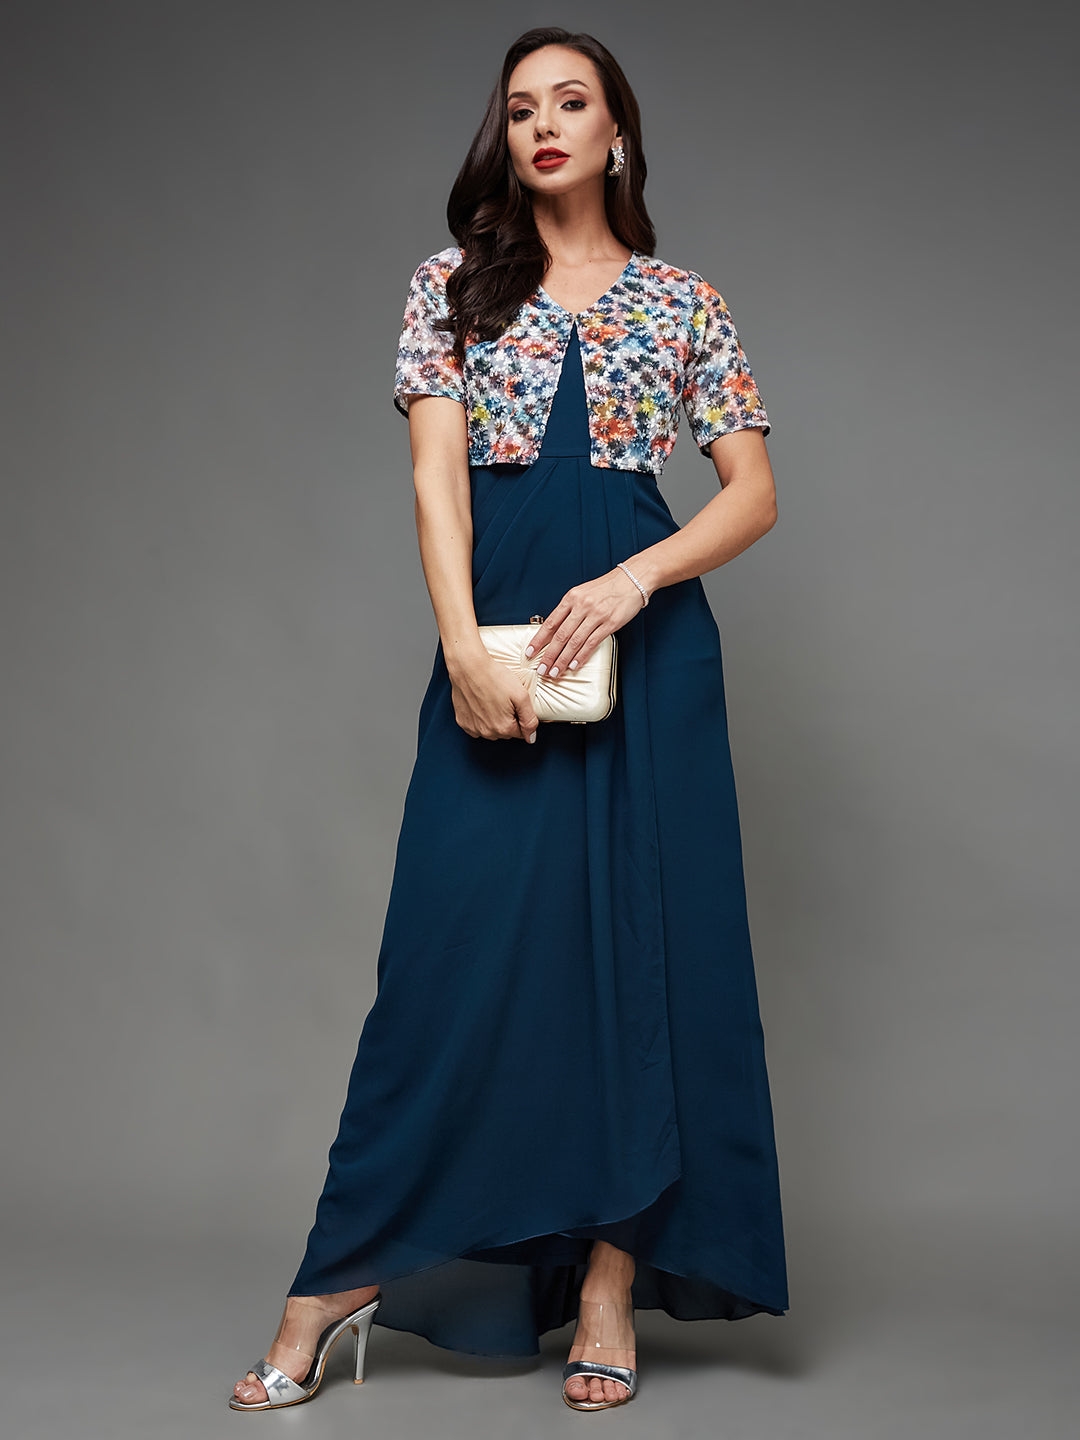 Multicolored-Base-Teal V-Neck Half Sleeve Embroidered Layered Maxi Georgette Dress